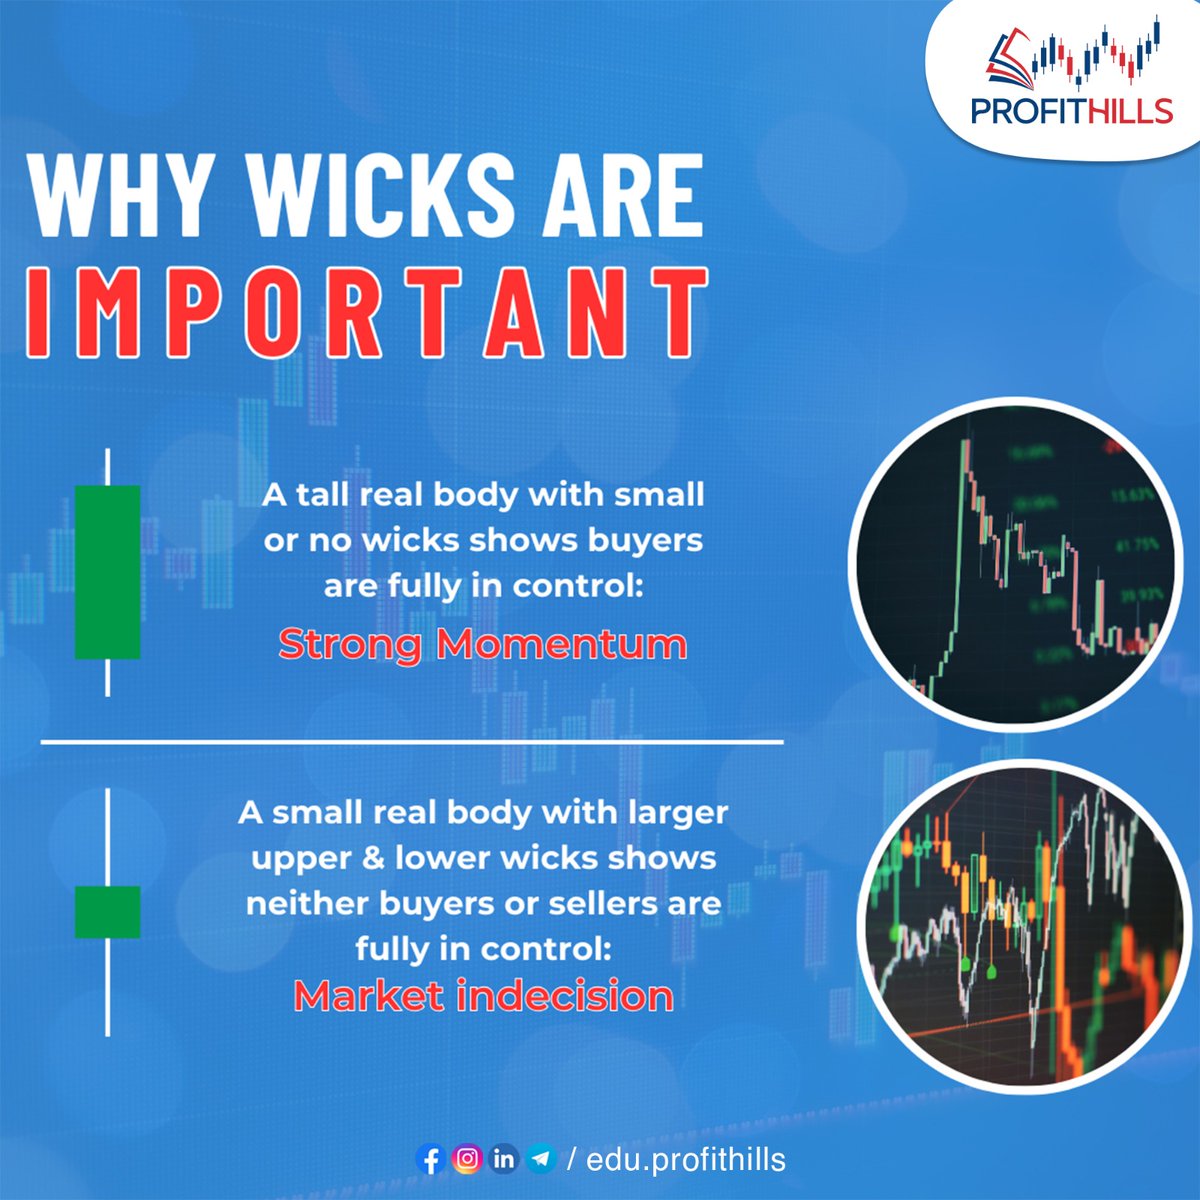 Dive into the world of Forex Trading and discover why wicks hold the key to understanding market sentiment! 📊
.
.
#sharemarket #ForexTrading #FinancialSuccess #CandlestickPatterns #stocks #Trading #Forextrading #Wicks #ForexTradingTips #Profithills